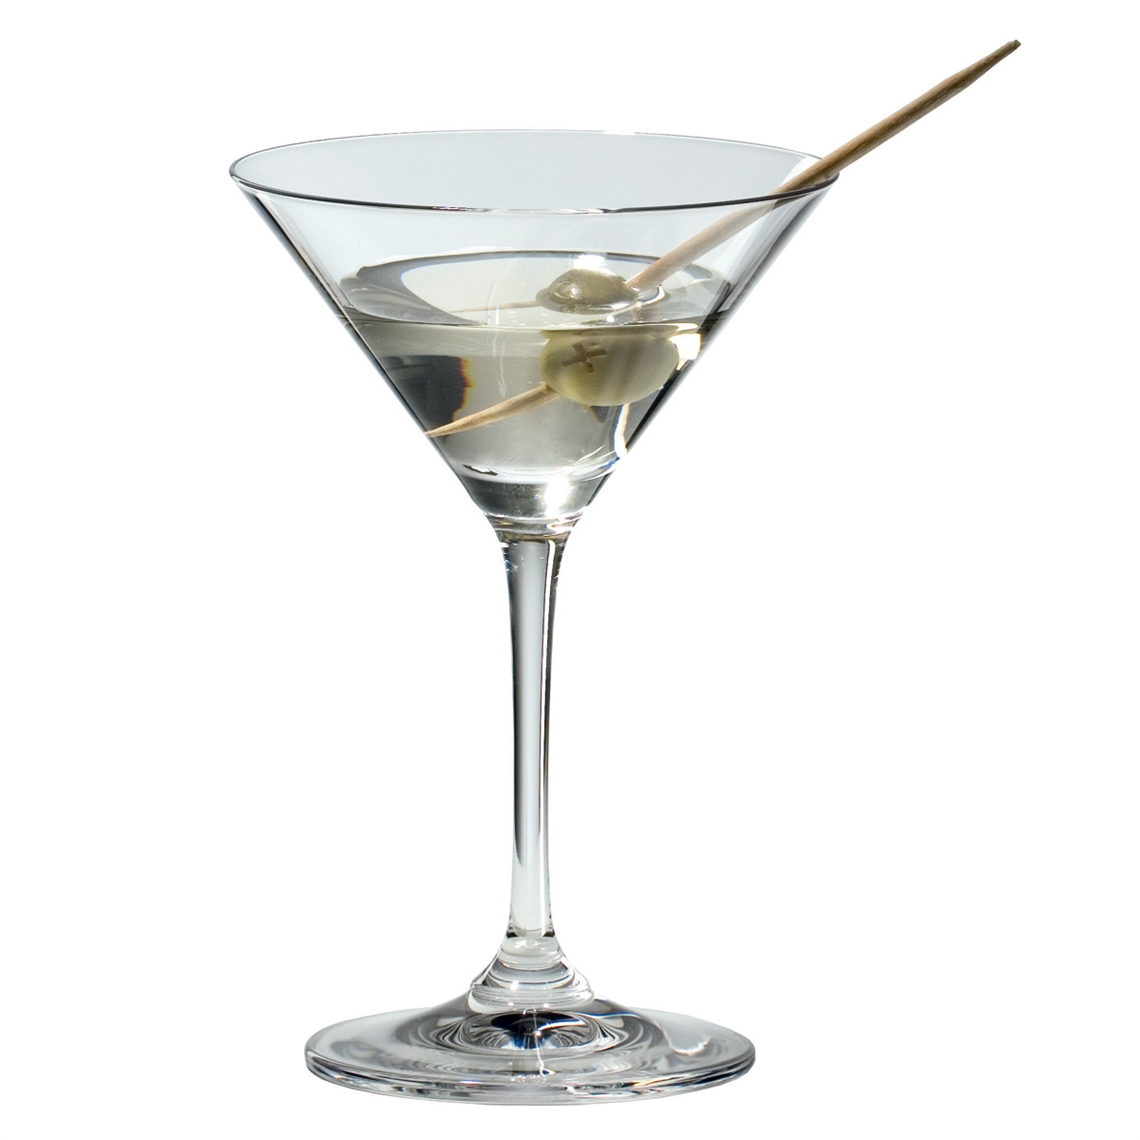 View more cocktail glasses from our Martini Glasses range